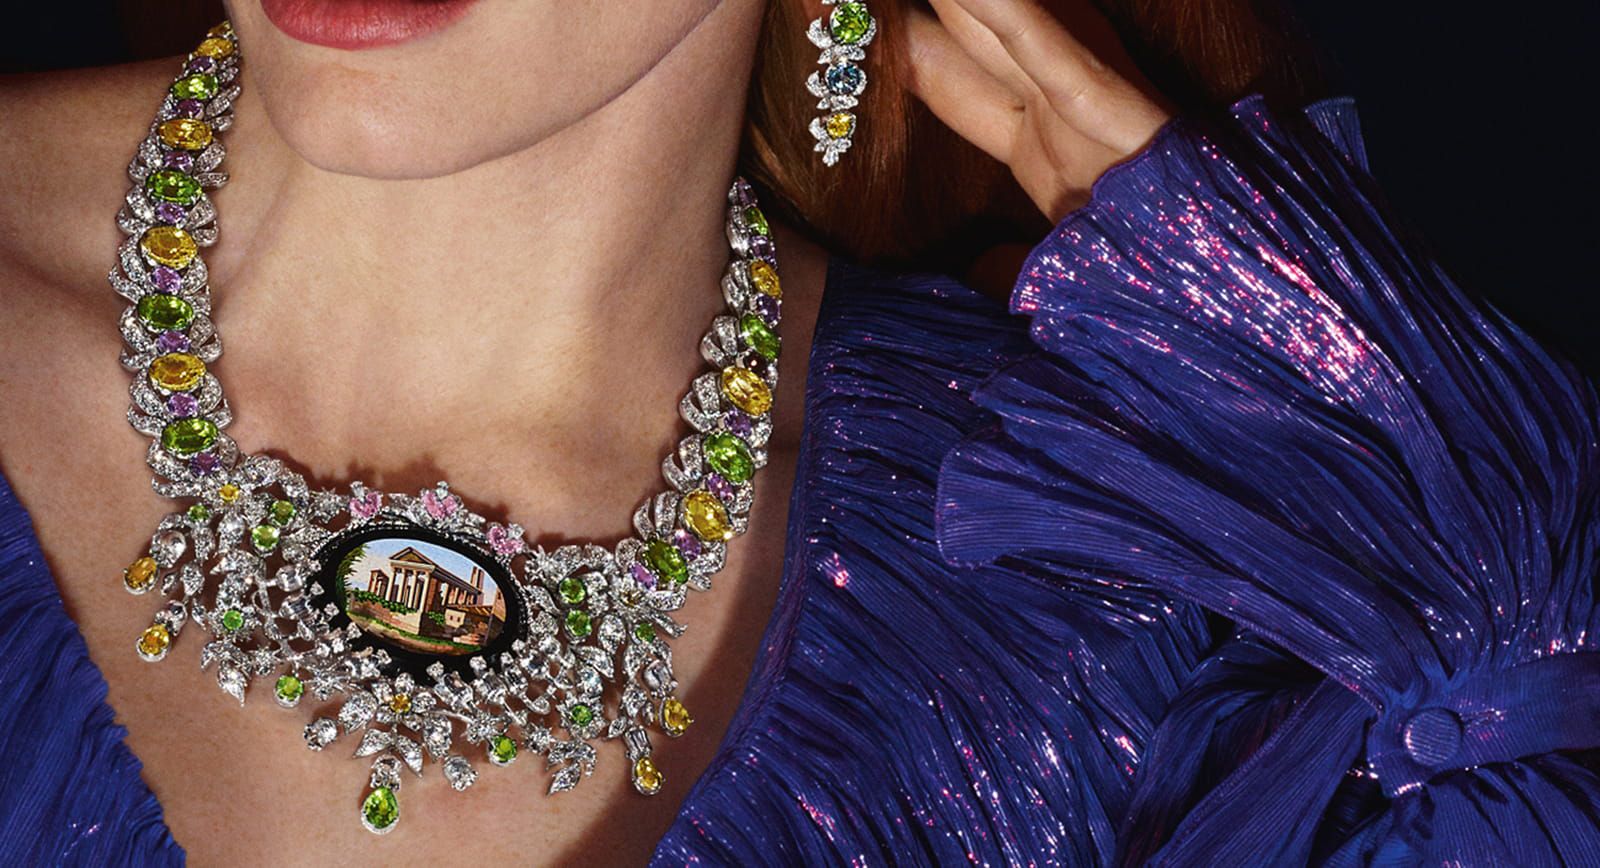 Gucci, Dior, and more introduce their high-jewelry lines during